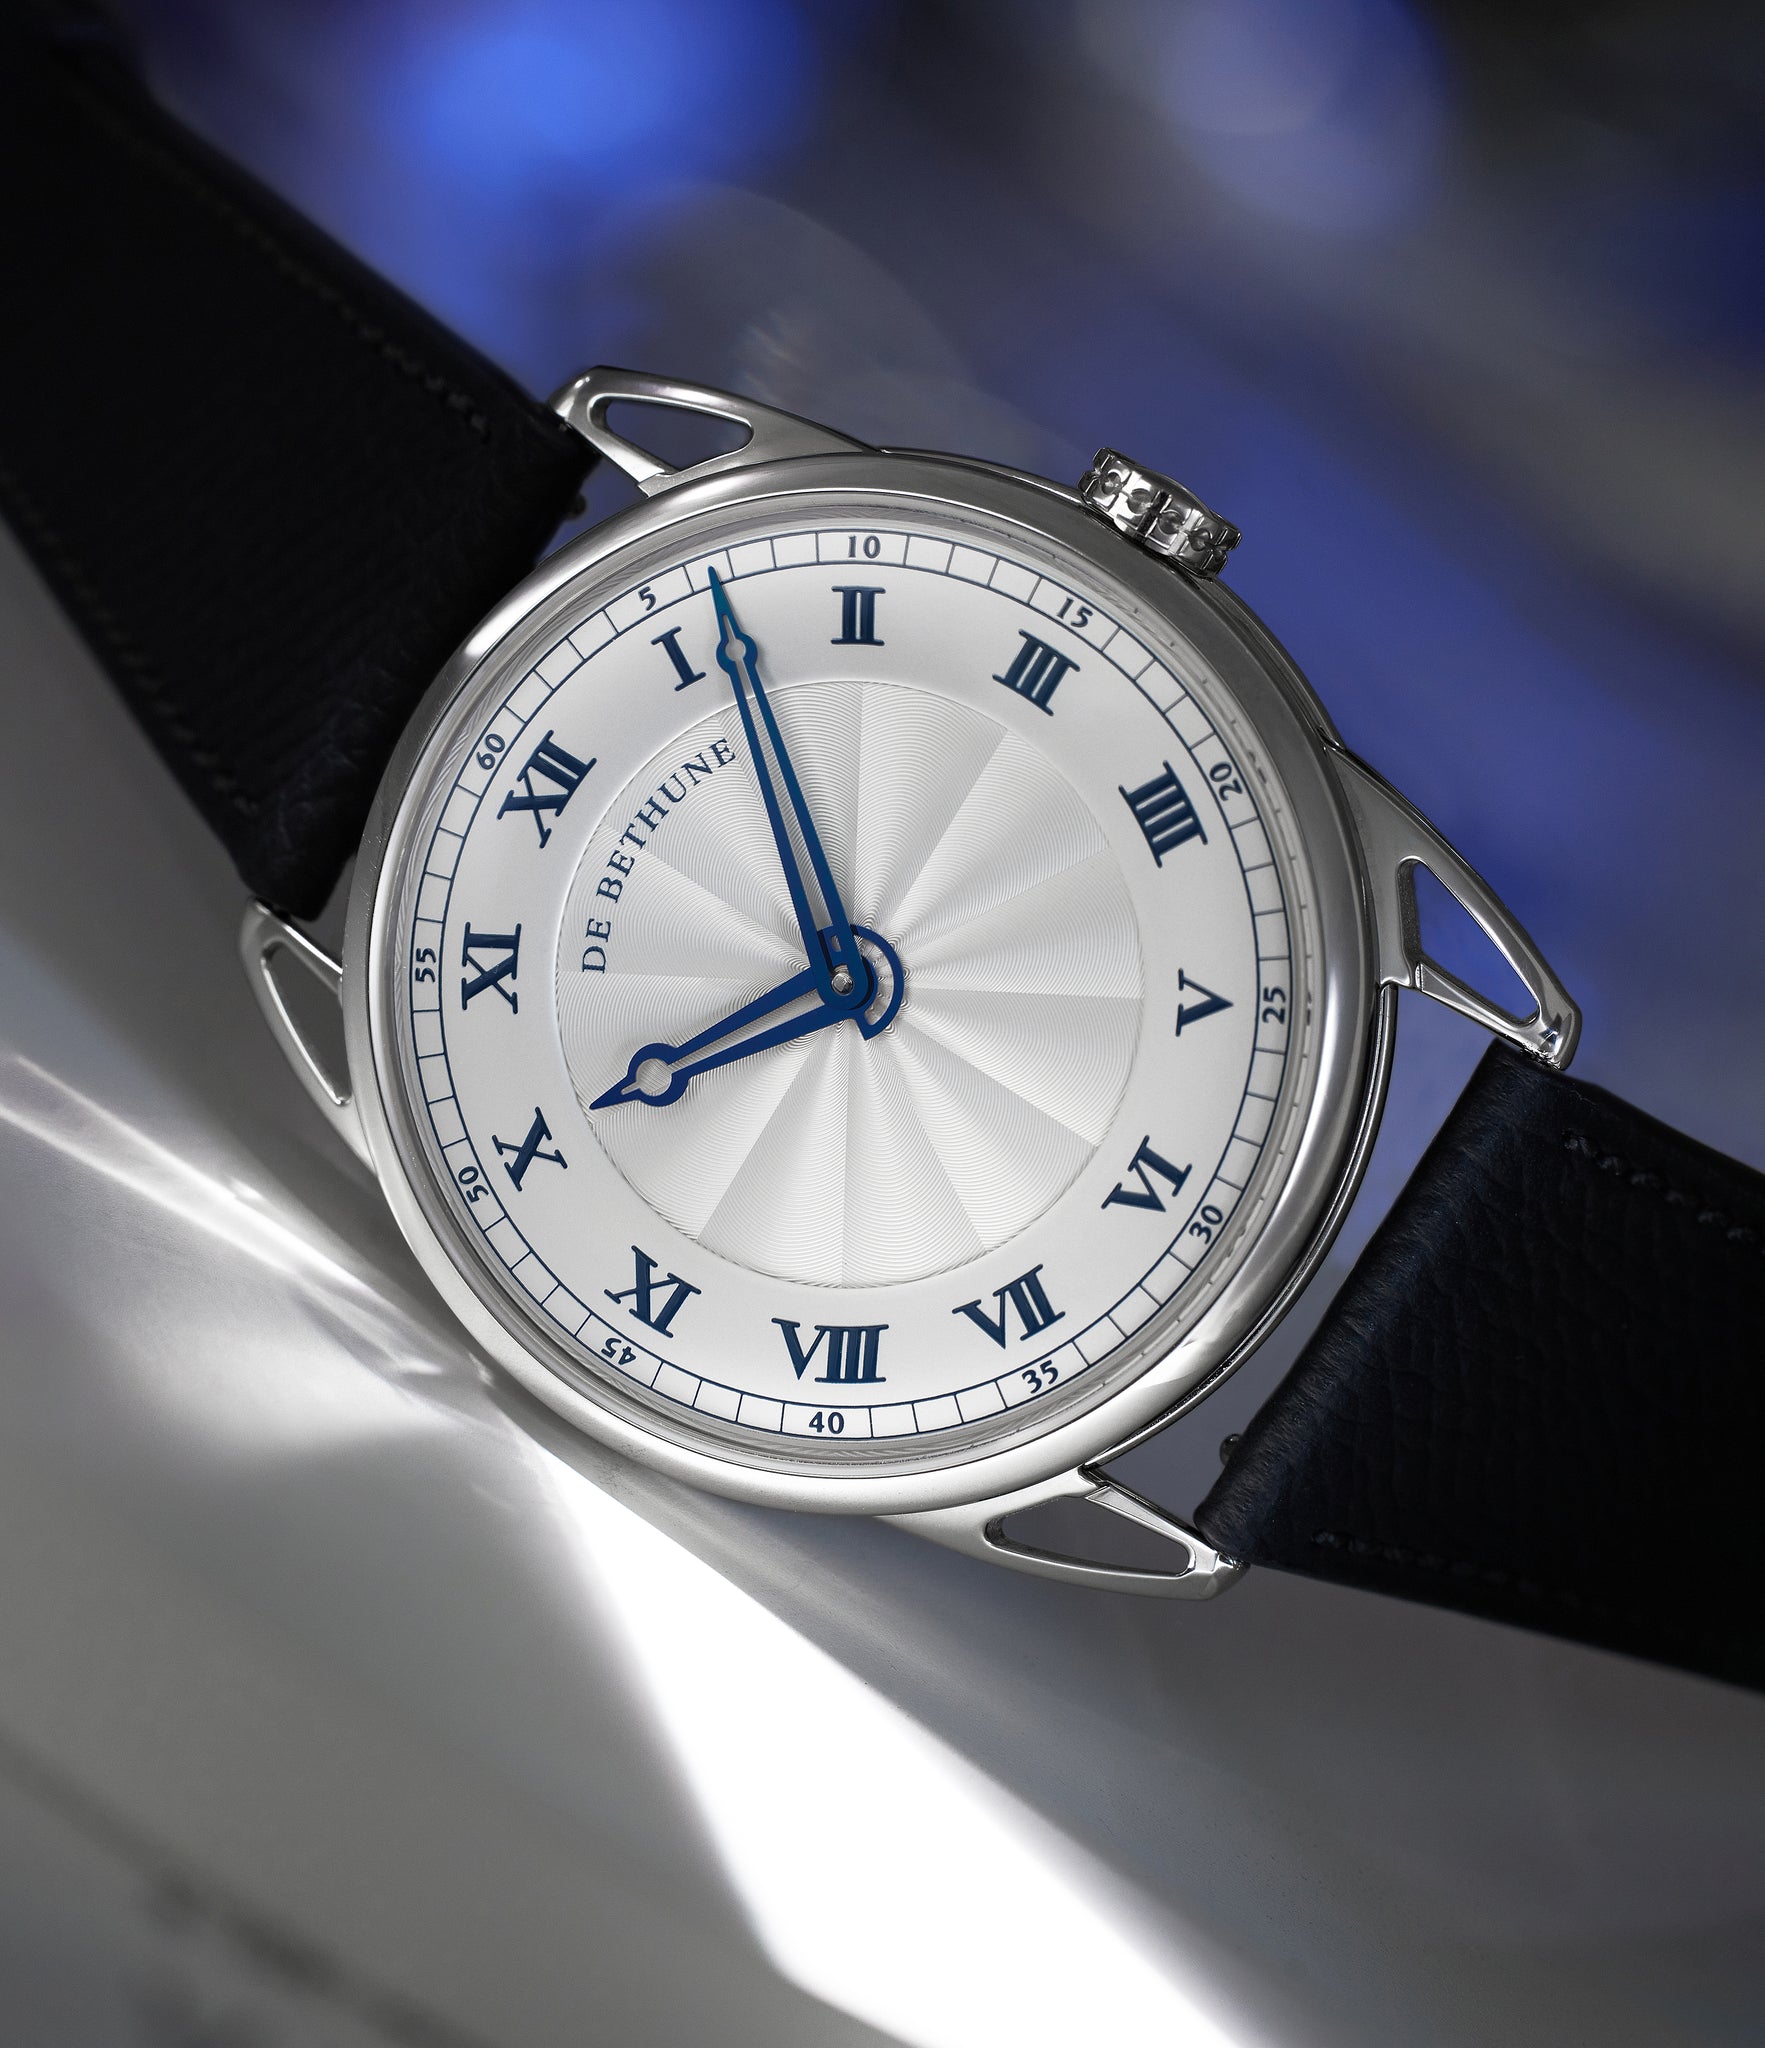 independent watchmaker De Bethune DB25 DB25vAWS1 White Gold preowned watch at A Collected Man London